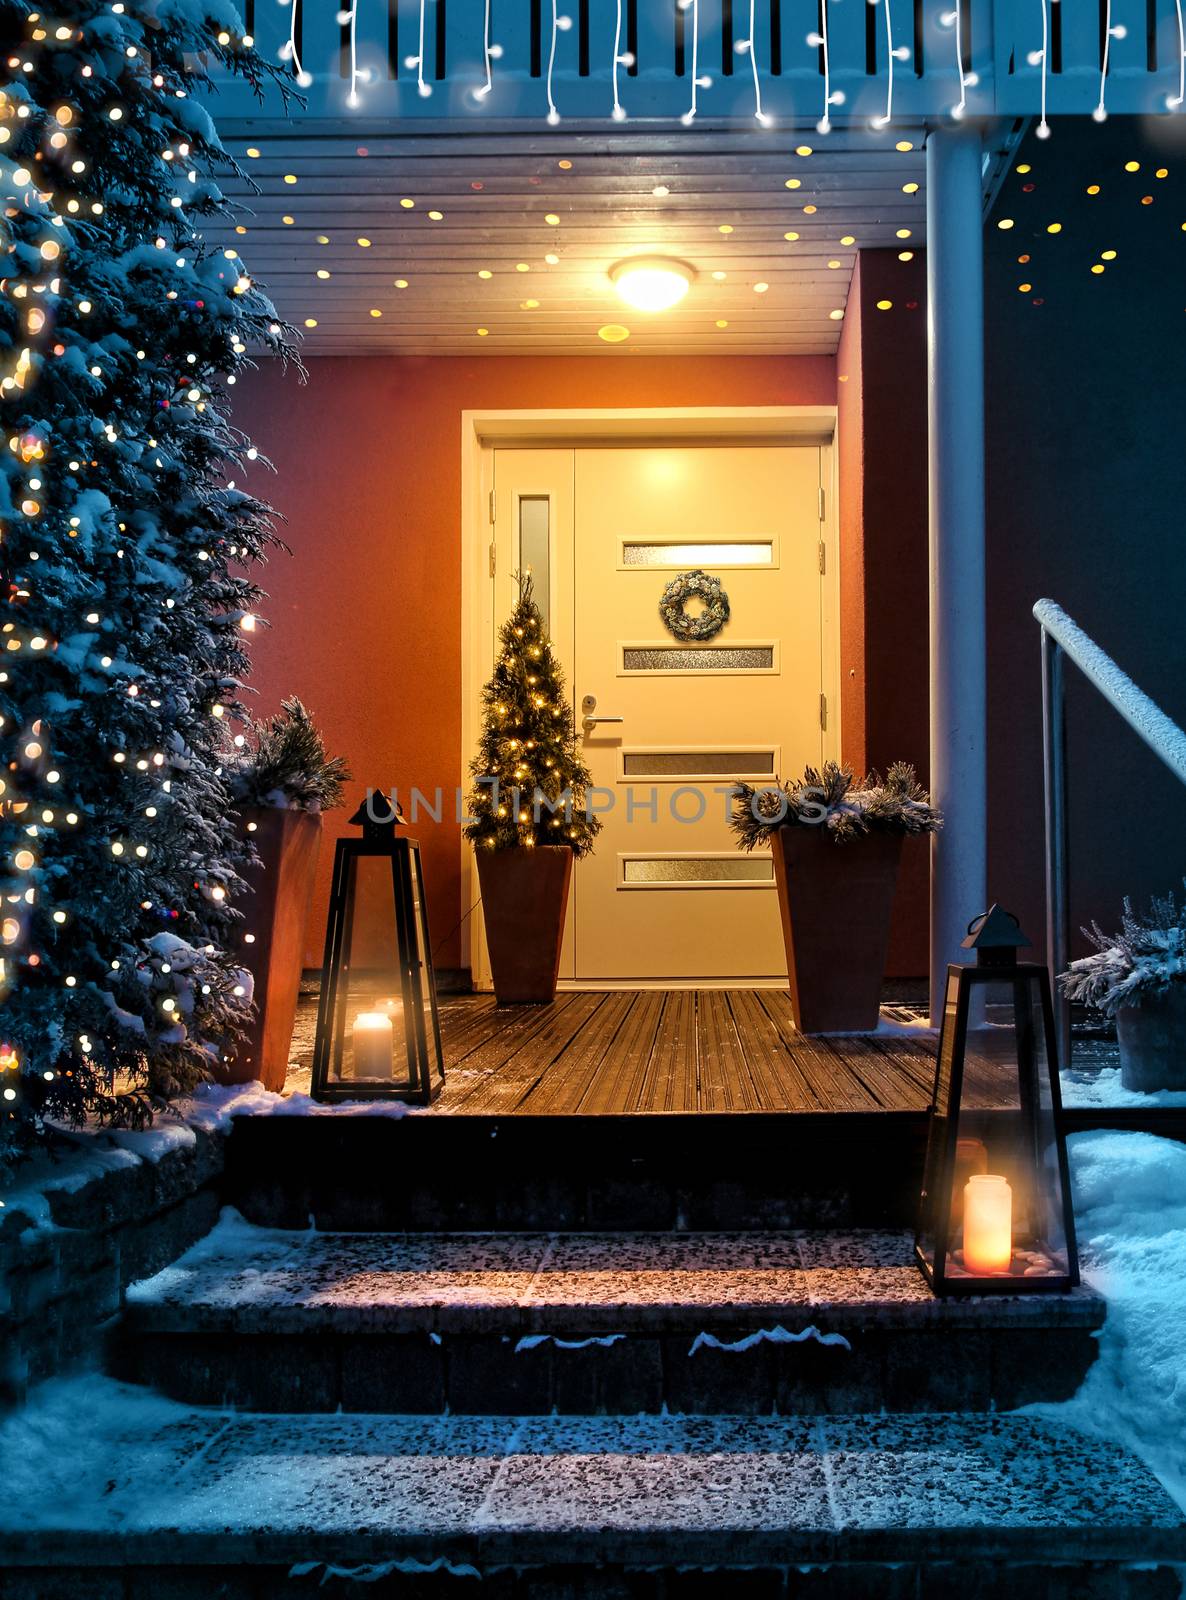 Welcome Christmas - house entrance snowy steps and door with decoration and festive lights